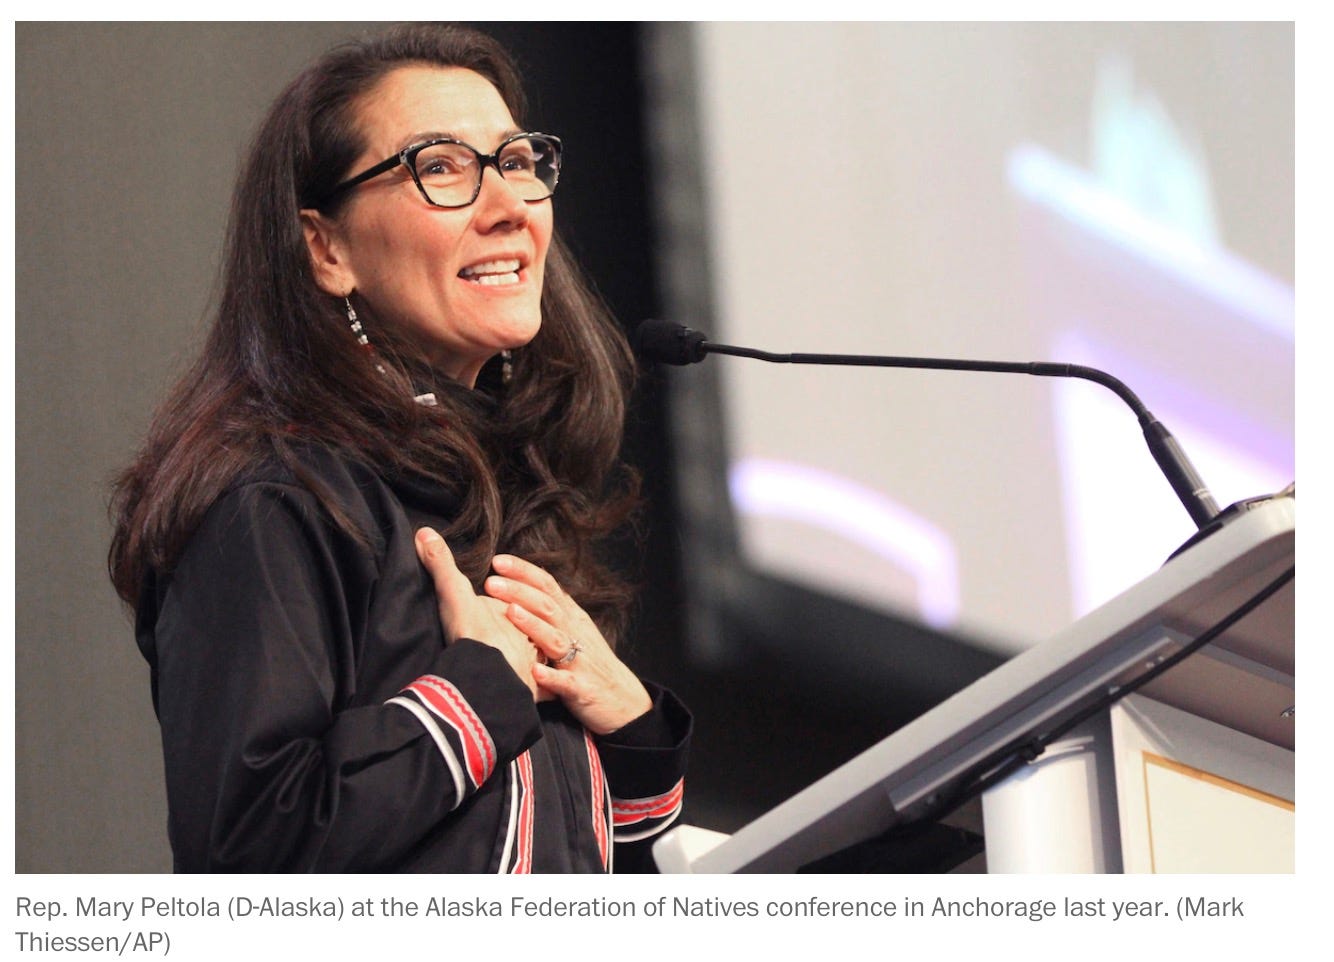 Rep. Mary Peltola (D-Alaska) at the Alaska Federation of Natives conference in Anchorage last year. (Mark Thiessen/AP)